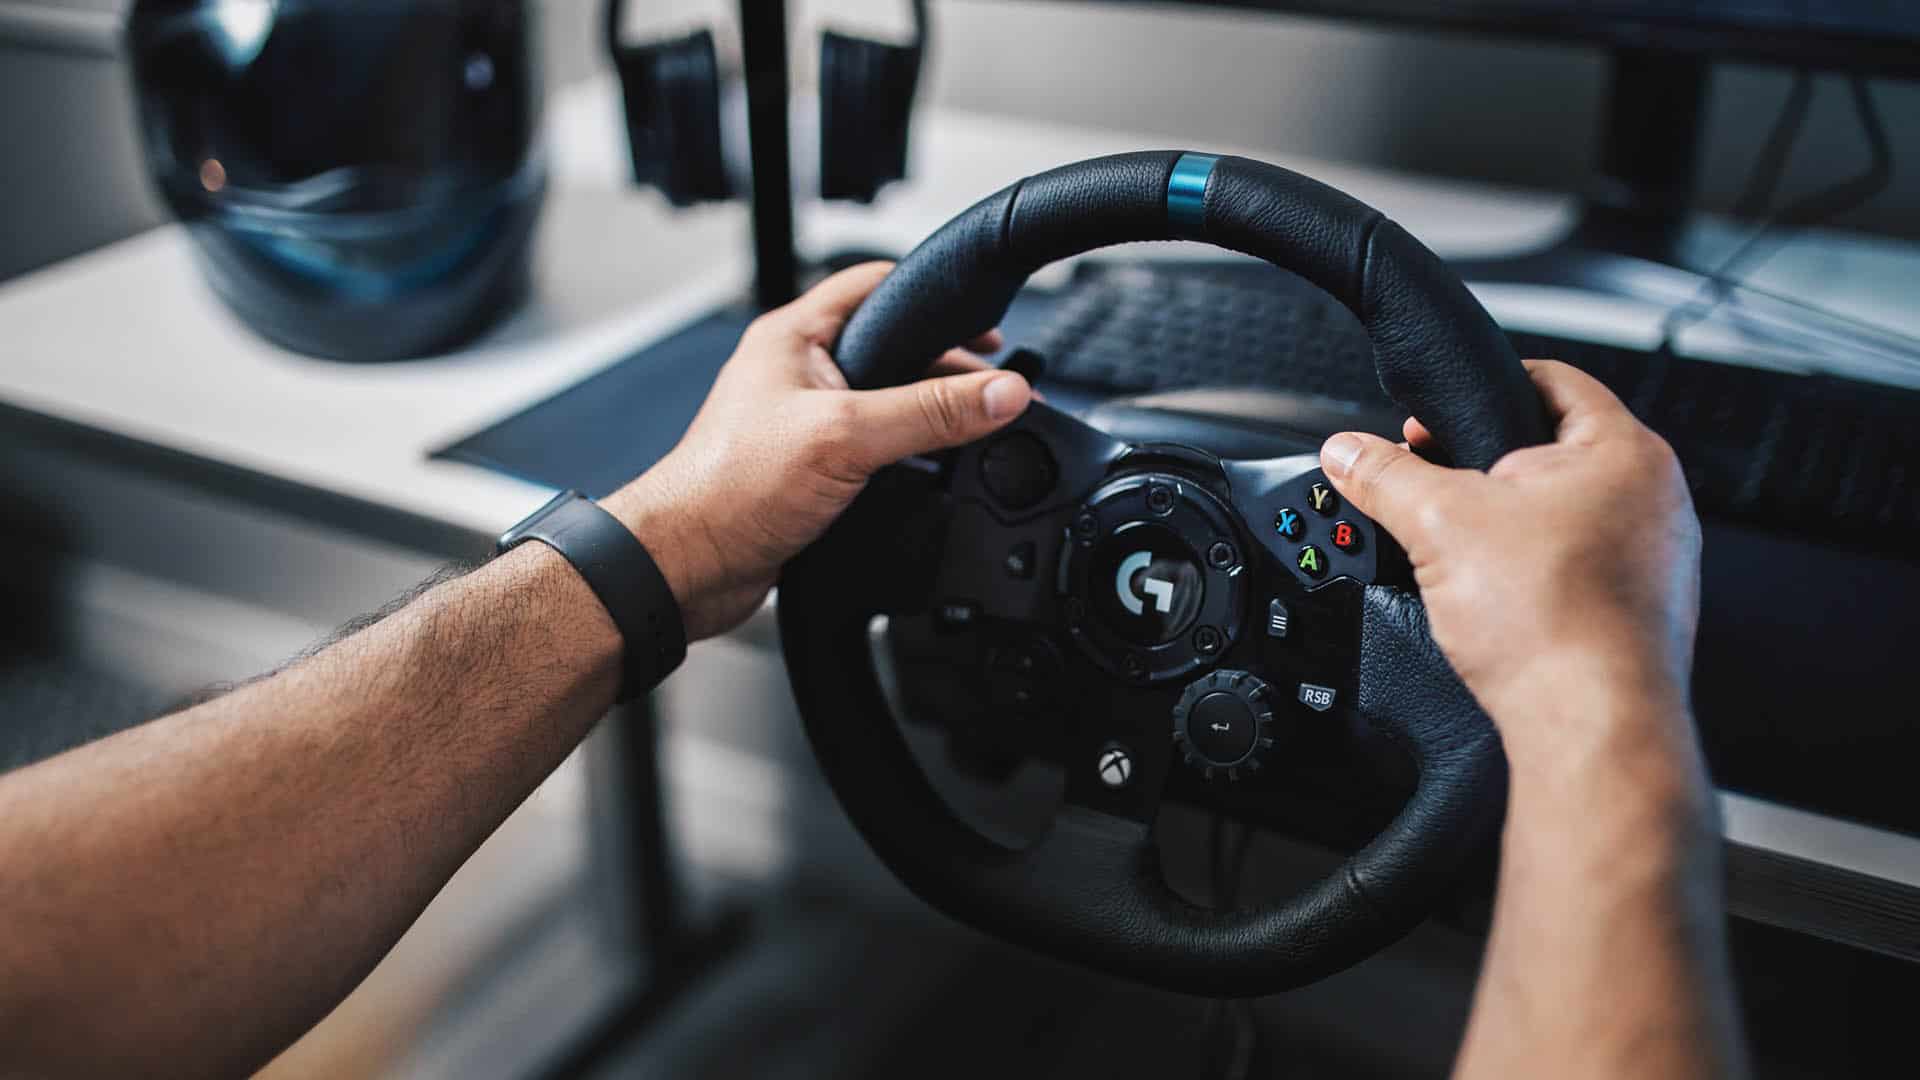 Logitech G923: How to connect your wheel to PC, Troubleshooting